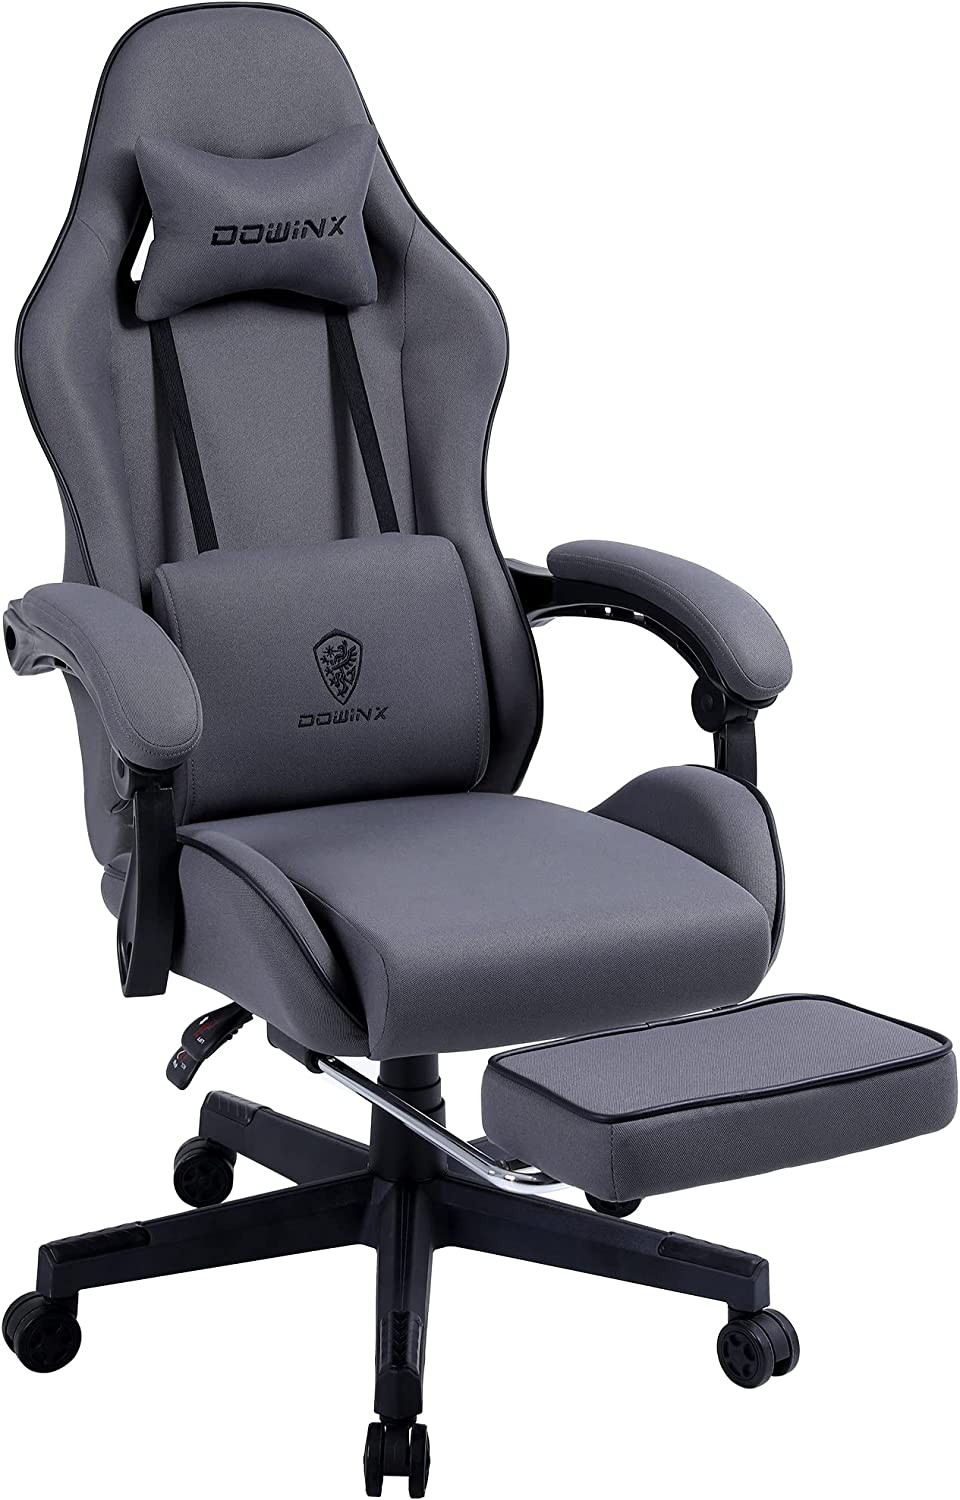 Dowinx Gaming Chair Fabric with Pocket Spring Cushion Grey